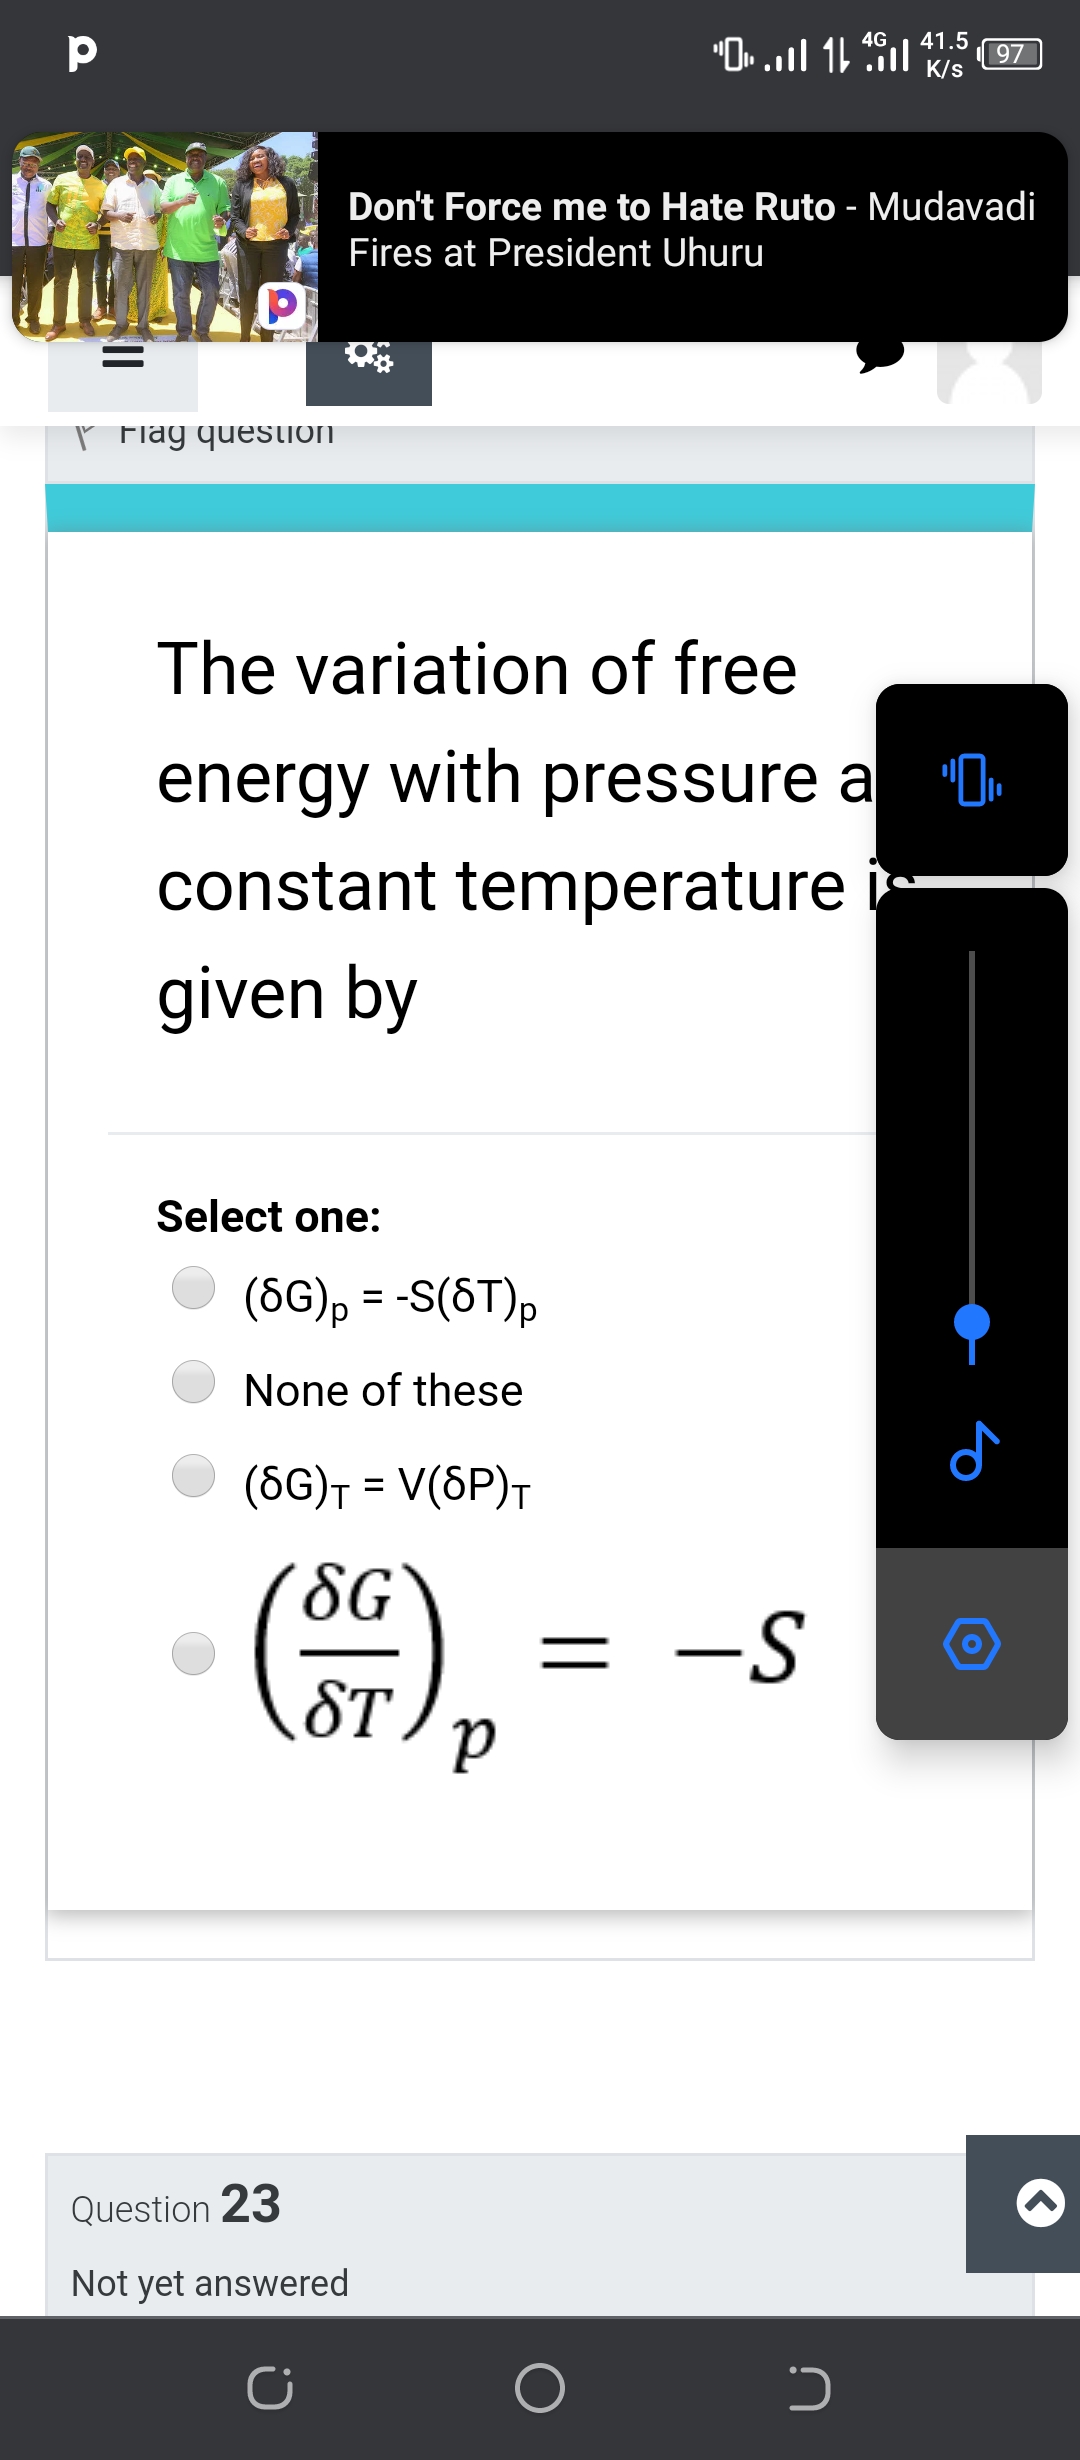 1L lה Hl. -י
4G
41.5
97
K/s
Don't Force me to Hate Ruto - Mudavadi
Fires at President Uhuru
ľ Flag question
The variation of free
energy with pressure a "O.
constant temperature
given by
Select one:
(6G), = -S(6T),
%3D
None of these
(6G)† = V(SP)T
8G
= -S
ST
Question 23
Not yet answered
